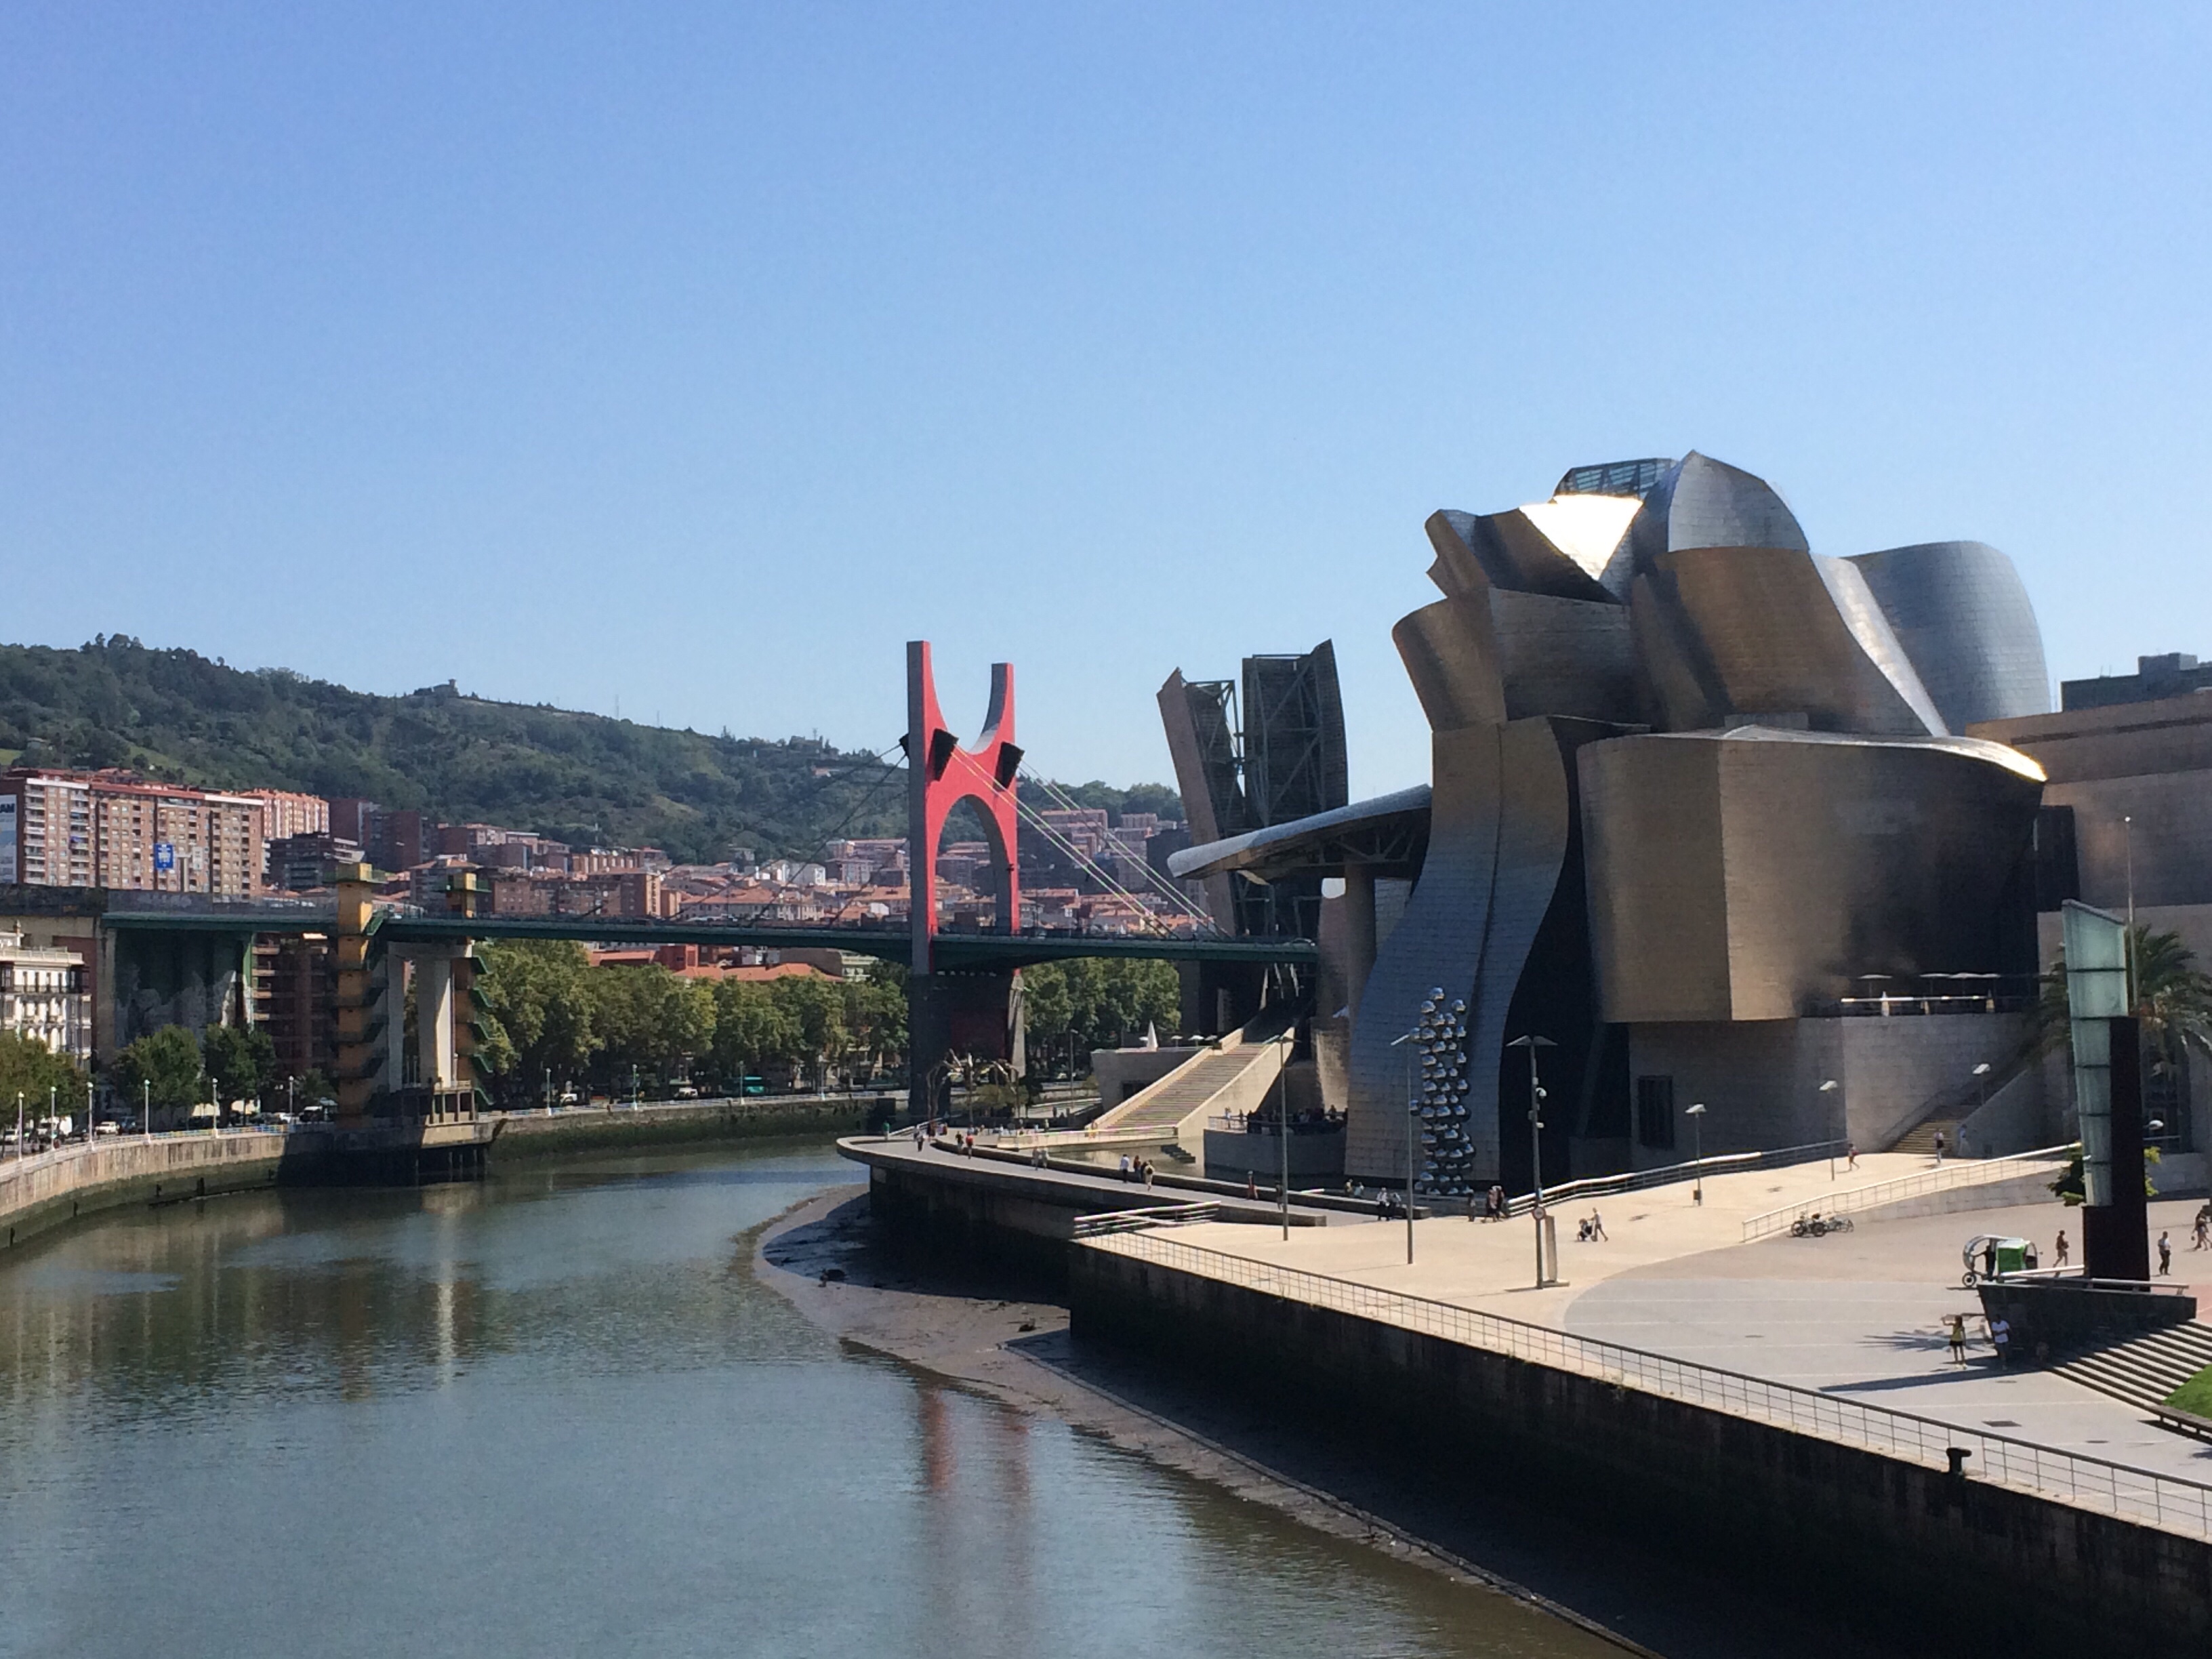 Stunning rear view of Gehry's museum in BIlbao